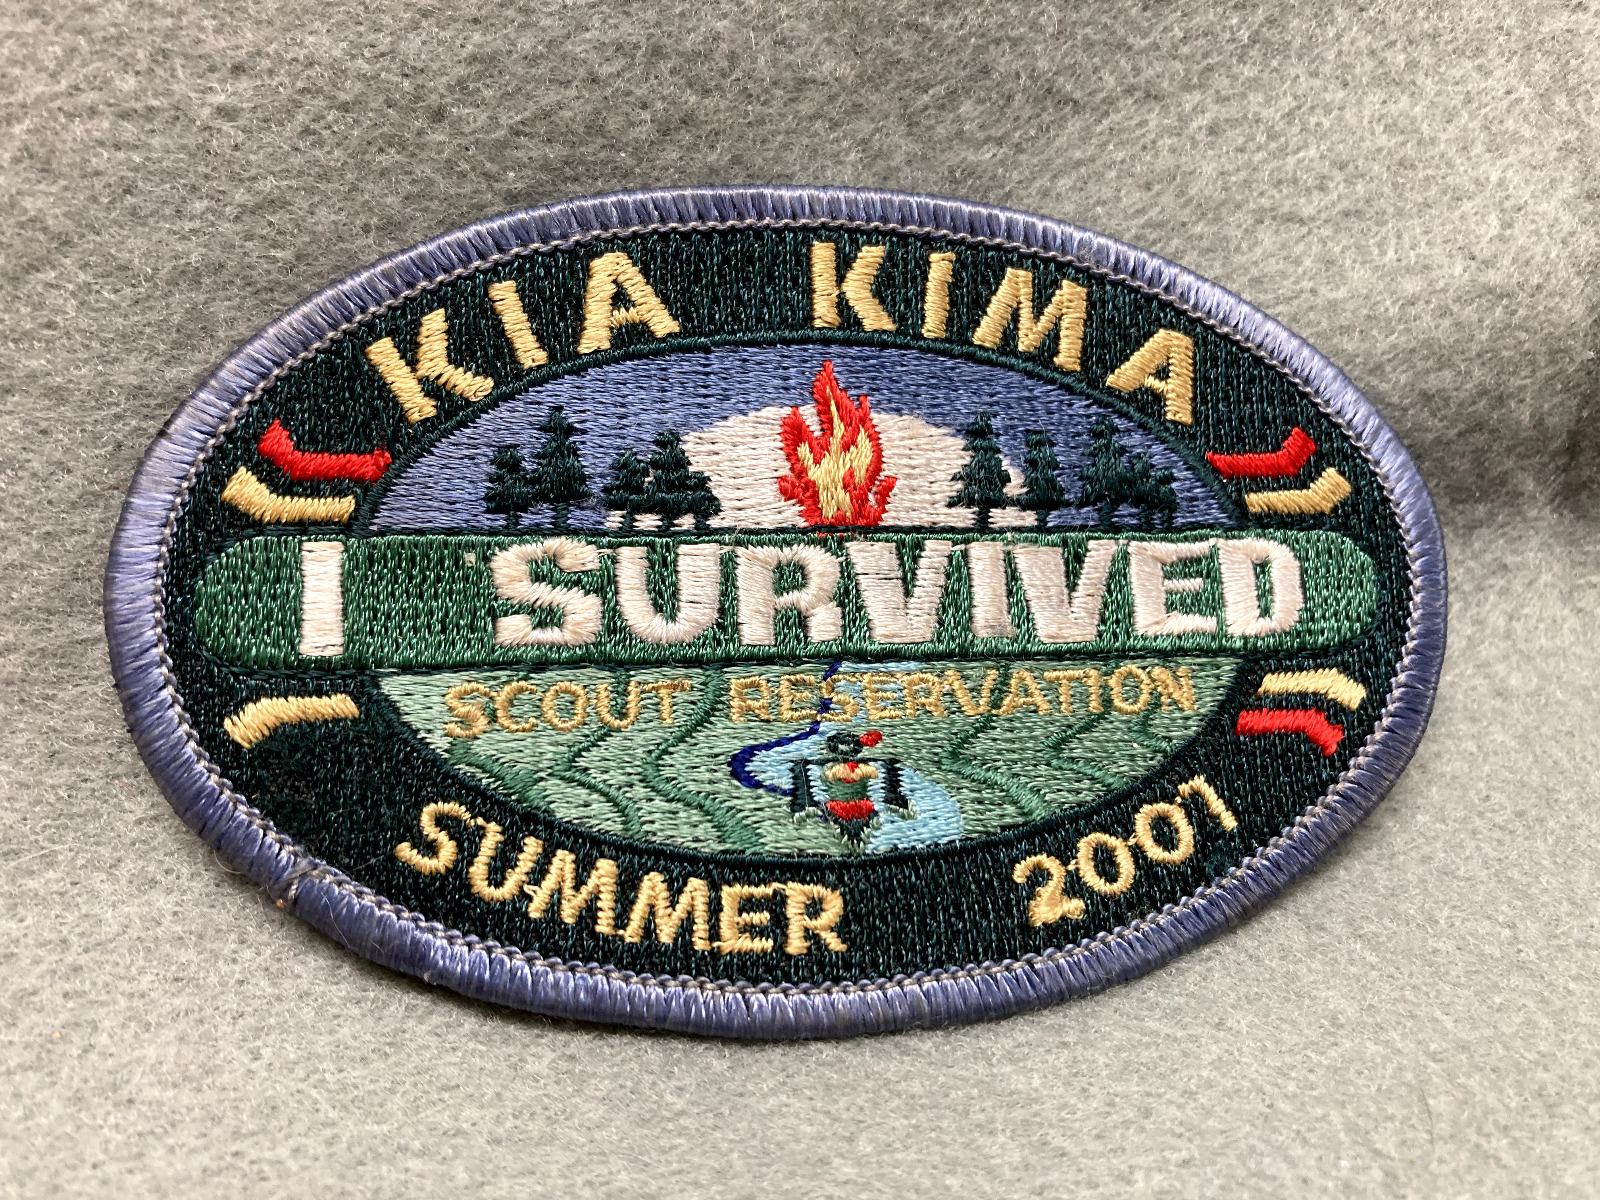 (QS-3)  2001 Kia Kima Scout Reservation patch